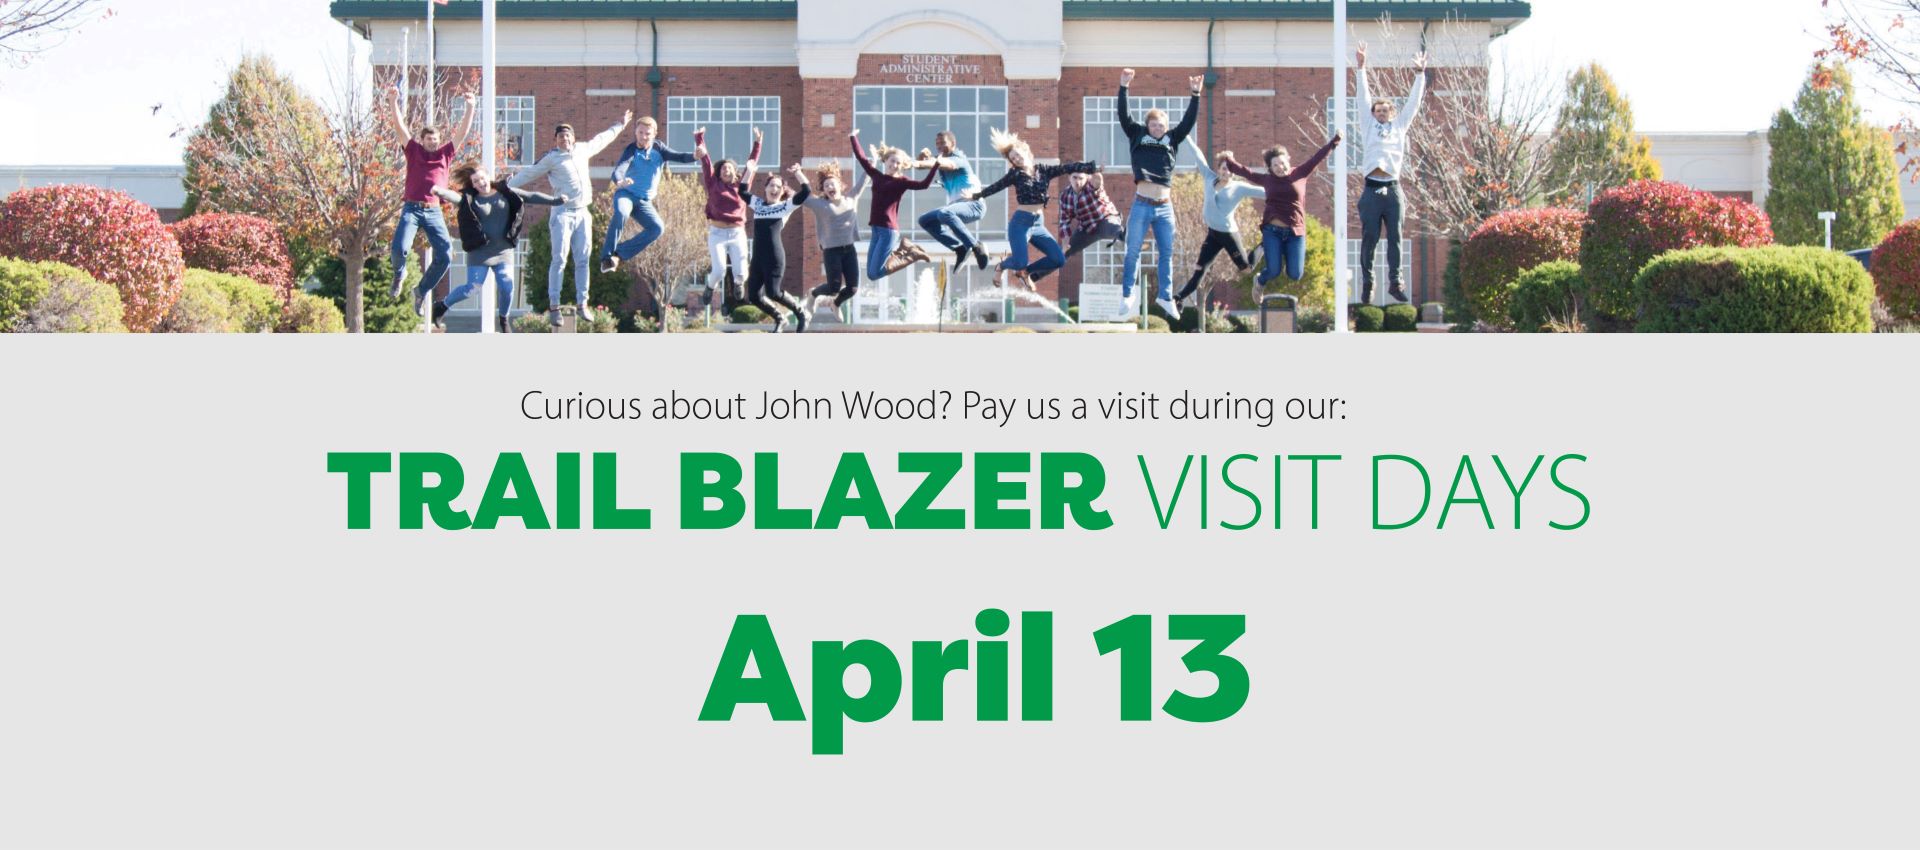 Curious about John Wood? Pay us a visit during our Trail Blazer Visit Days, April 13